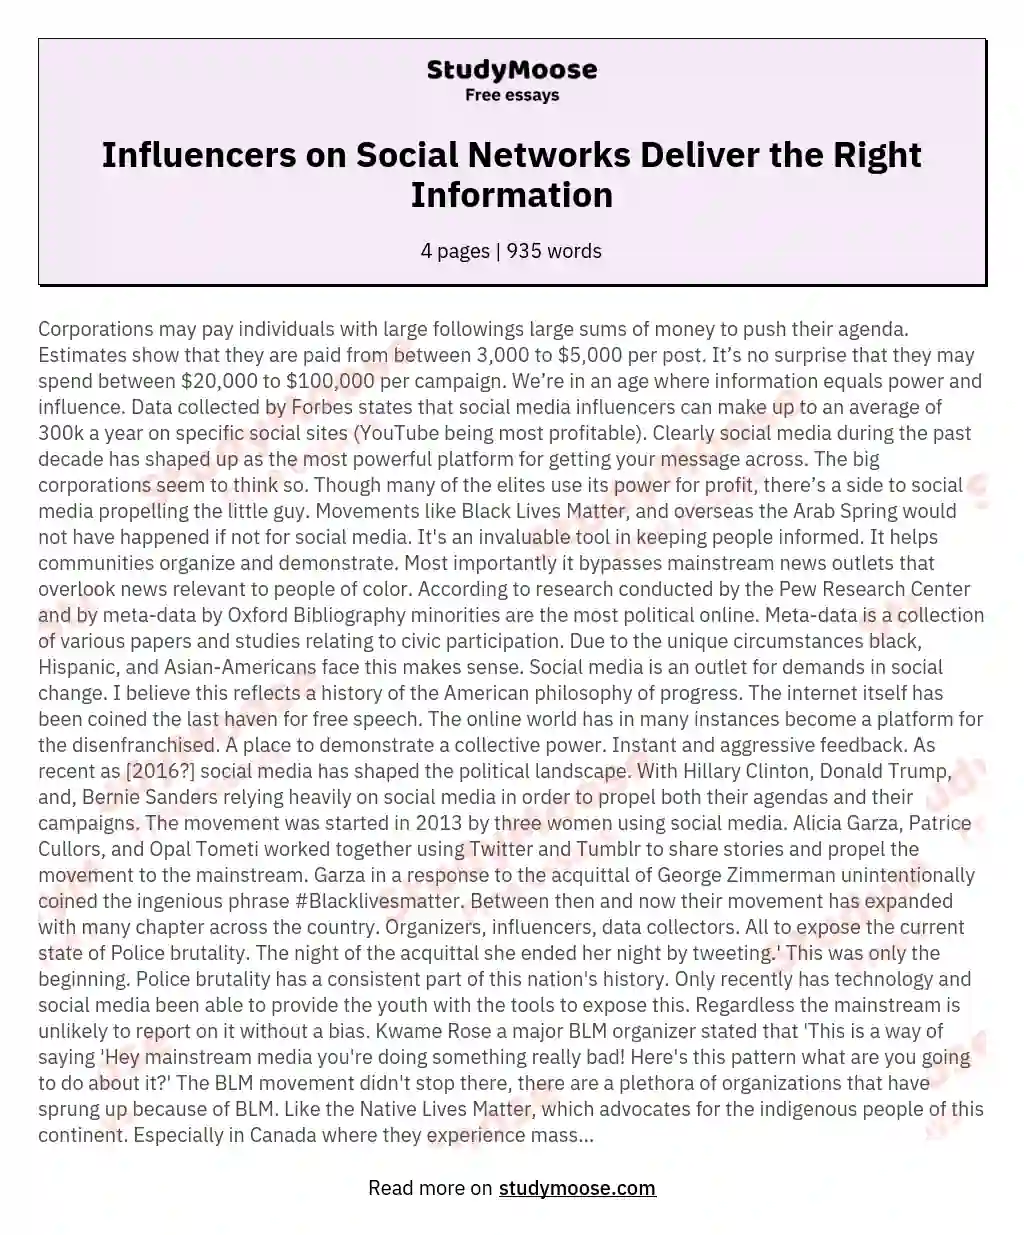 Influencers on Social Networks Deliver the Right Information essay